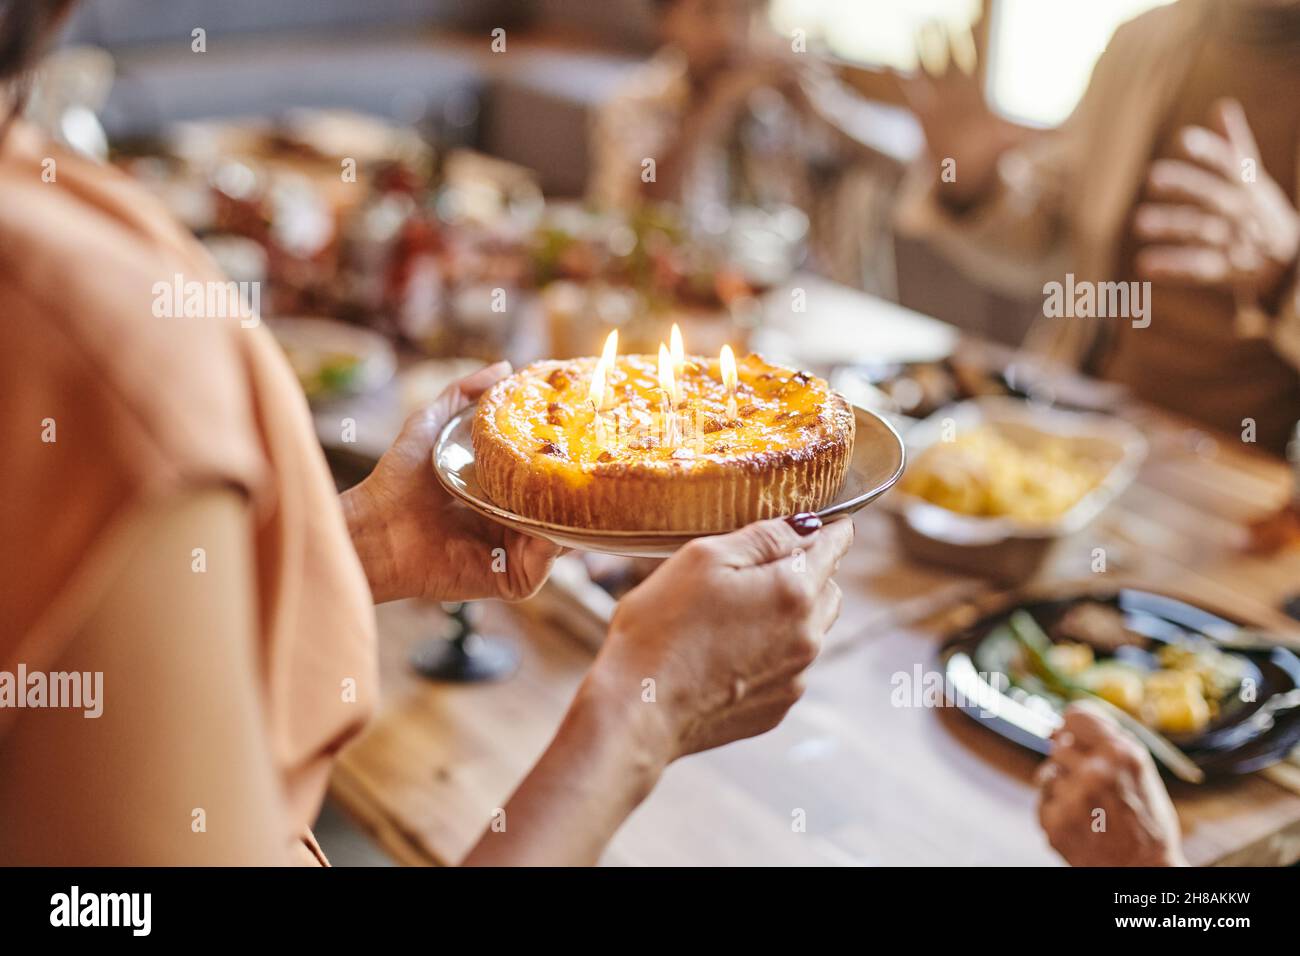 Hands of young woman holding plate with homemade birthday cake with several burning candles while standing by festive table Stock Photo